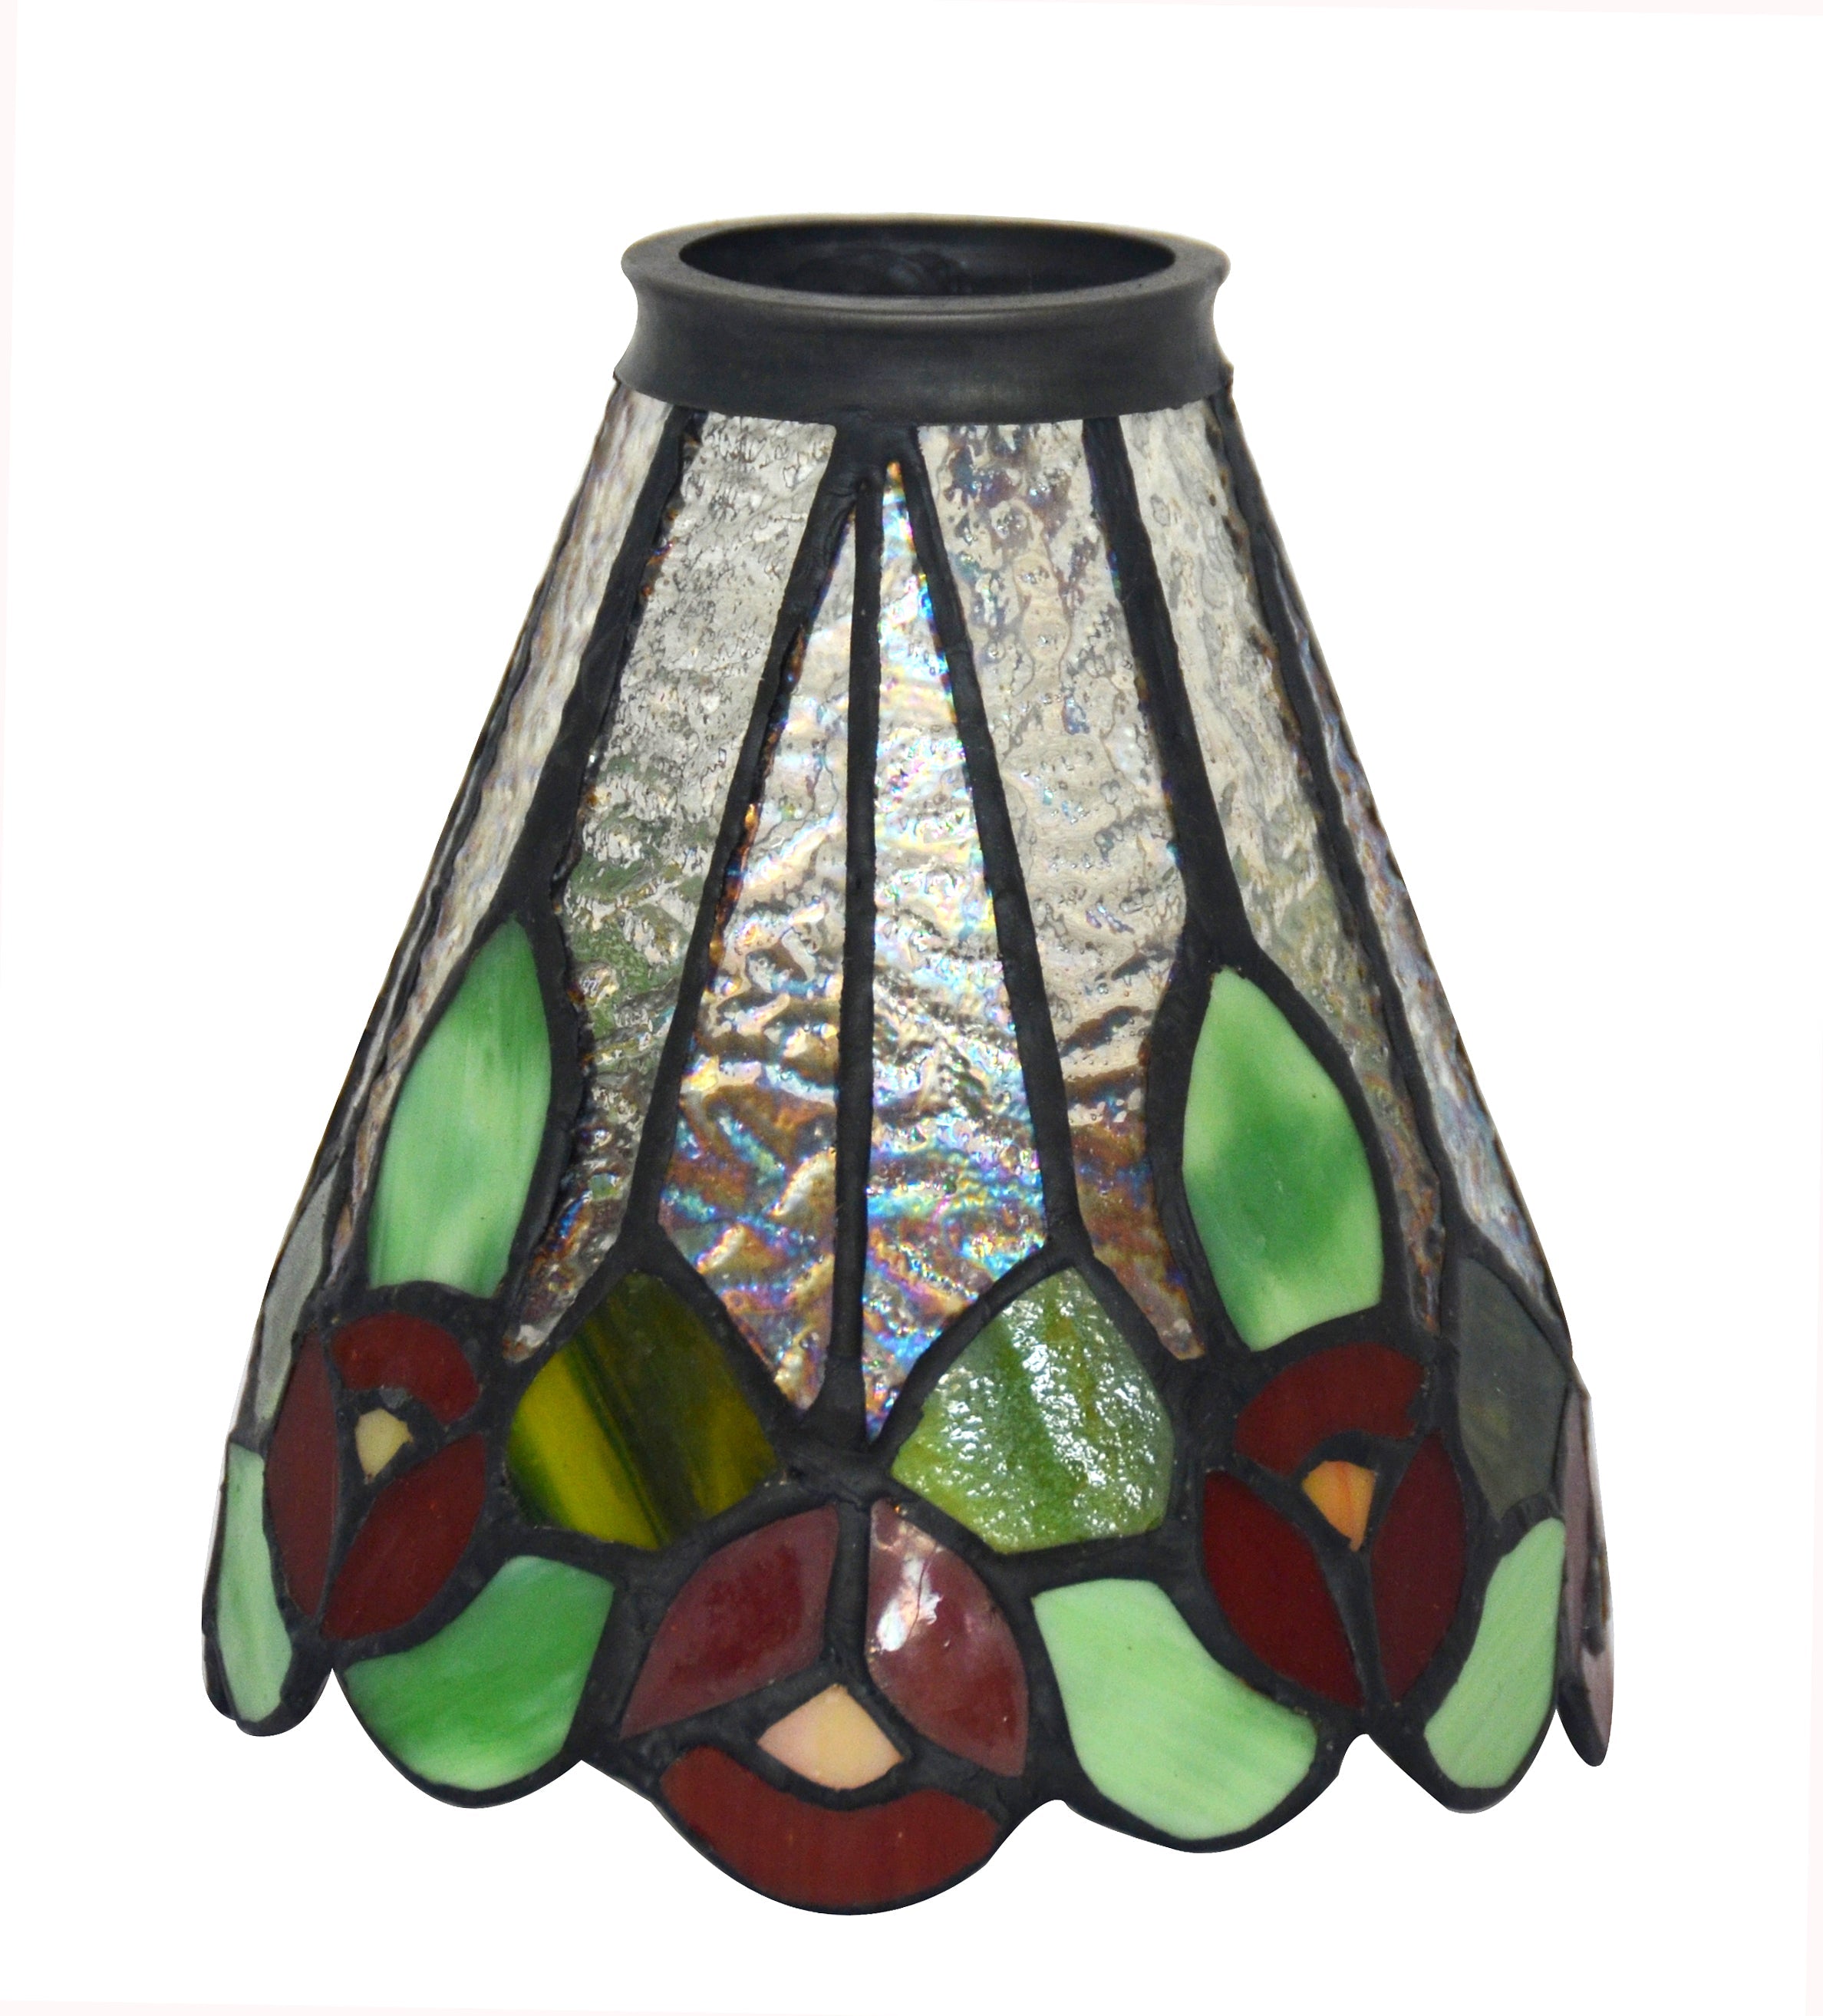 3 light Clove Flower Style Tiffany Stained Glass Pendant Lights